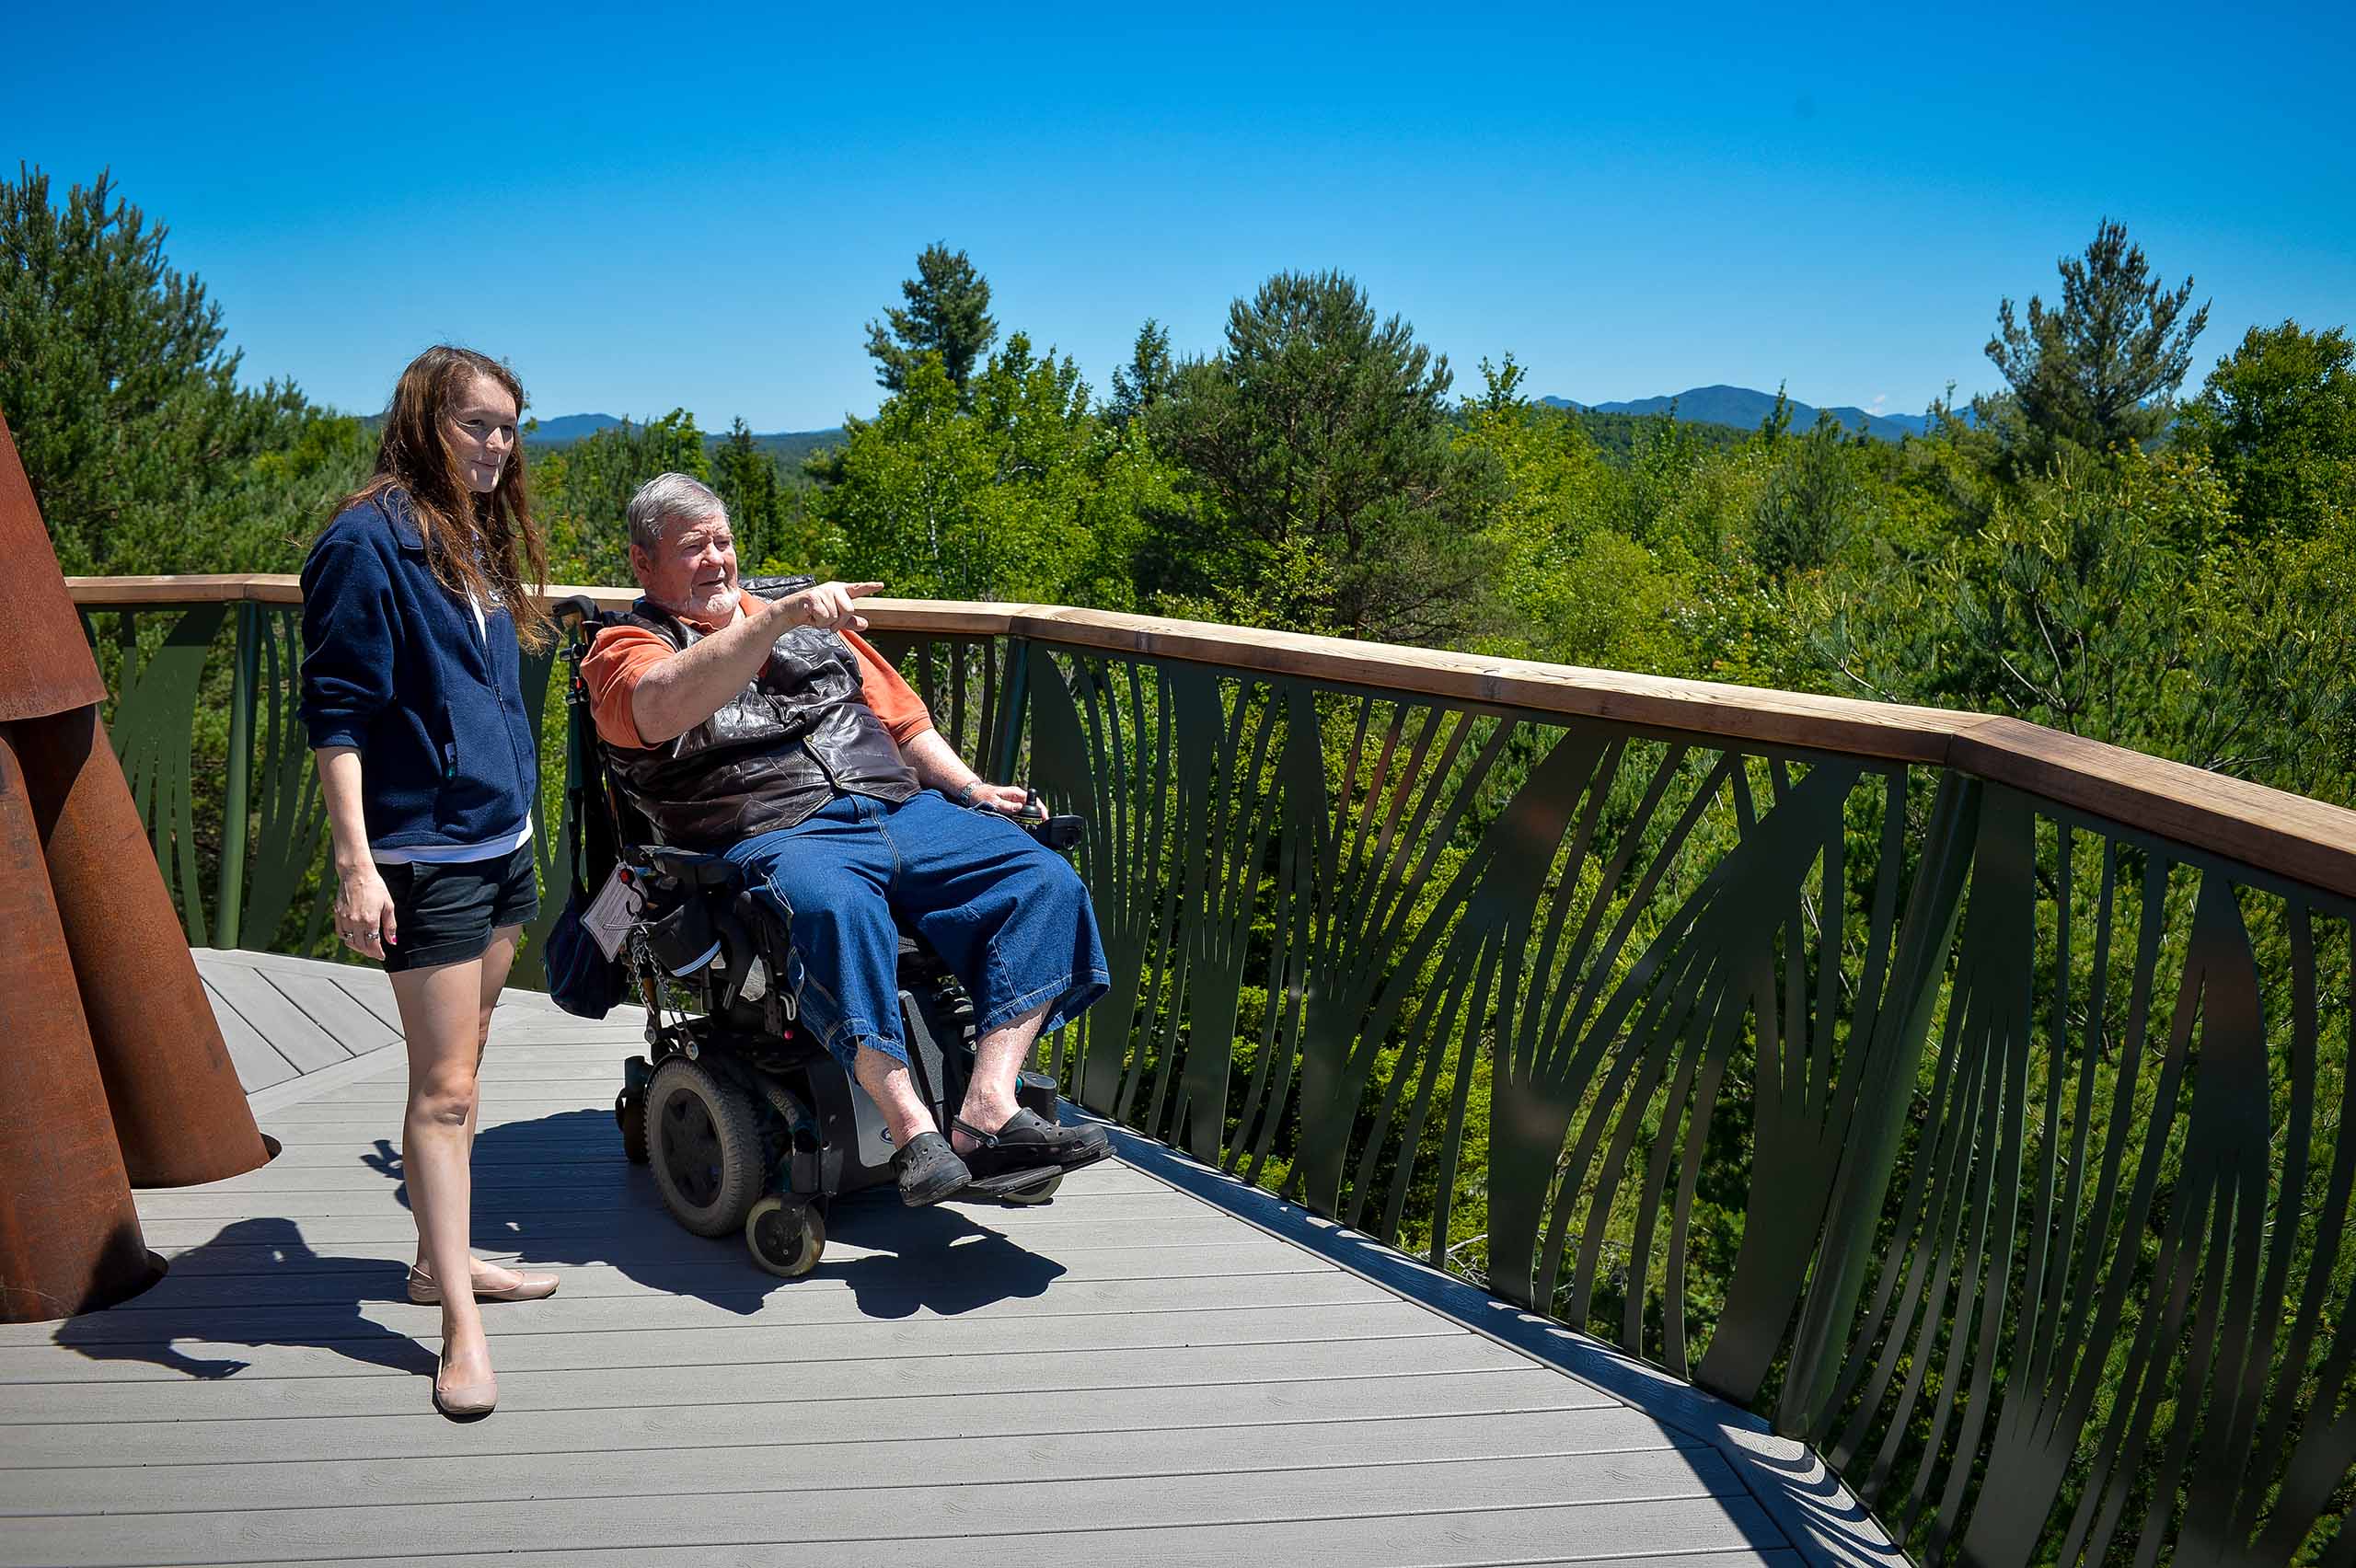 Wild Center visitor in wheelchair on Wild Walk points out detail to teenage girl.